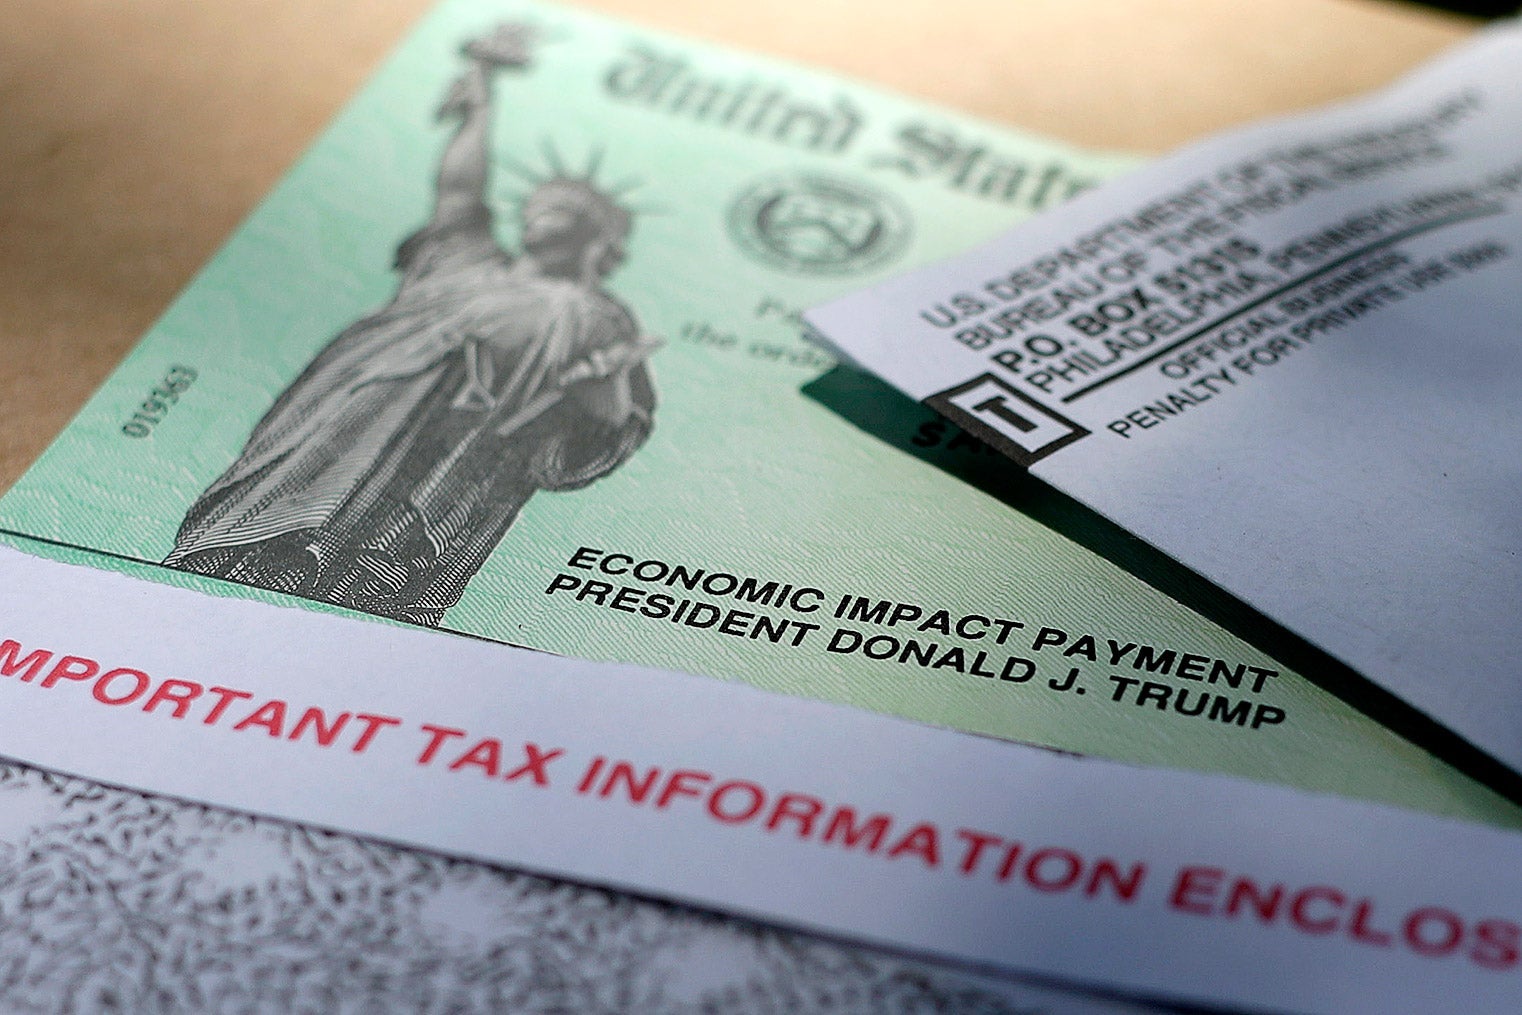 A United States treasury stimulus check on which an image of the Statue of Liberty and the words "Economic Impact Payment, President Donald J. Trump" can be seen.